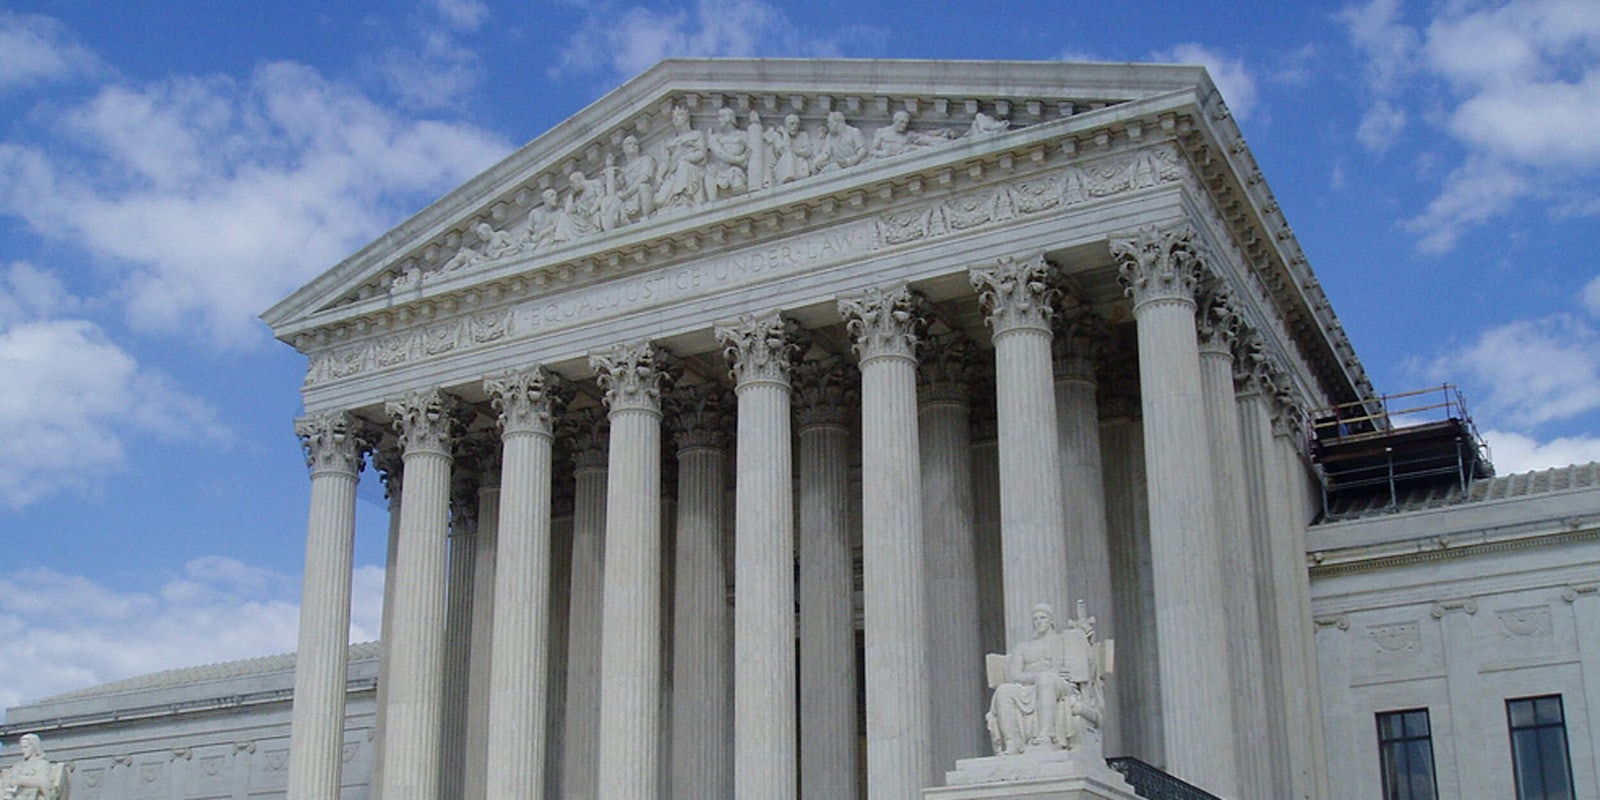 Politicians have spoken out against gerrymandering ahead of the Supreme Court's upcoming case.